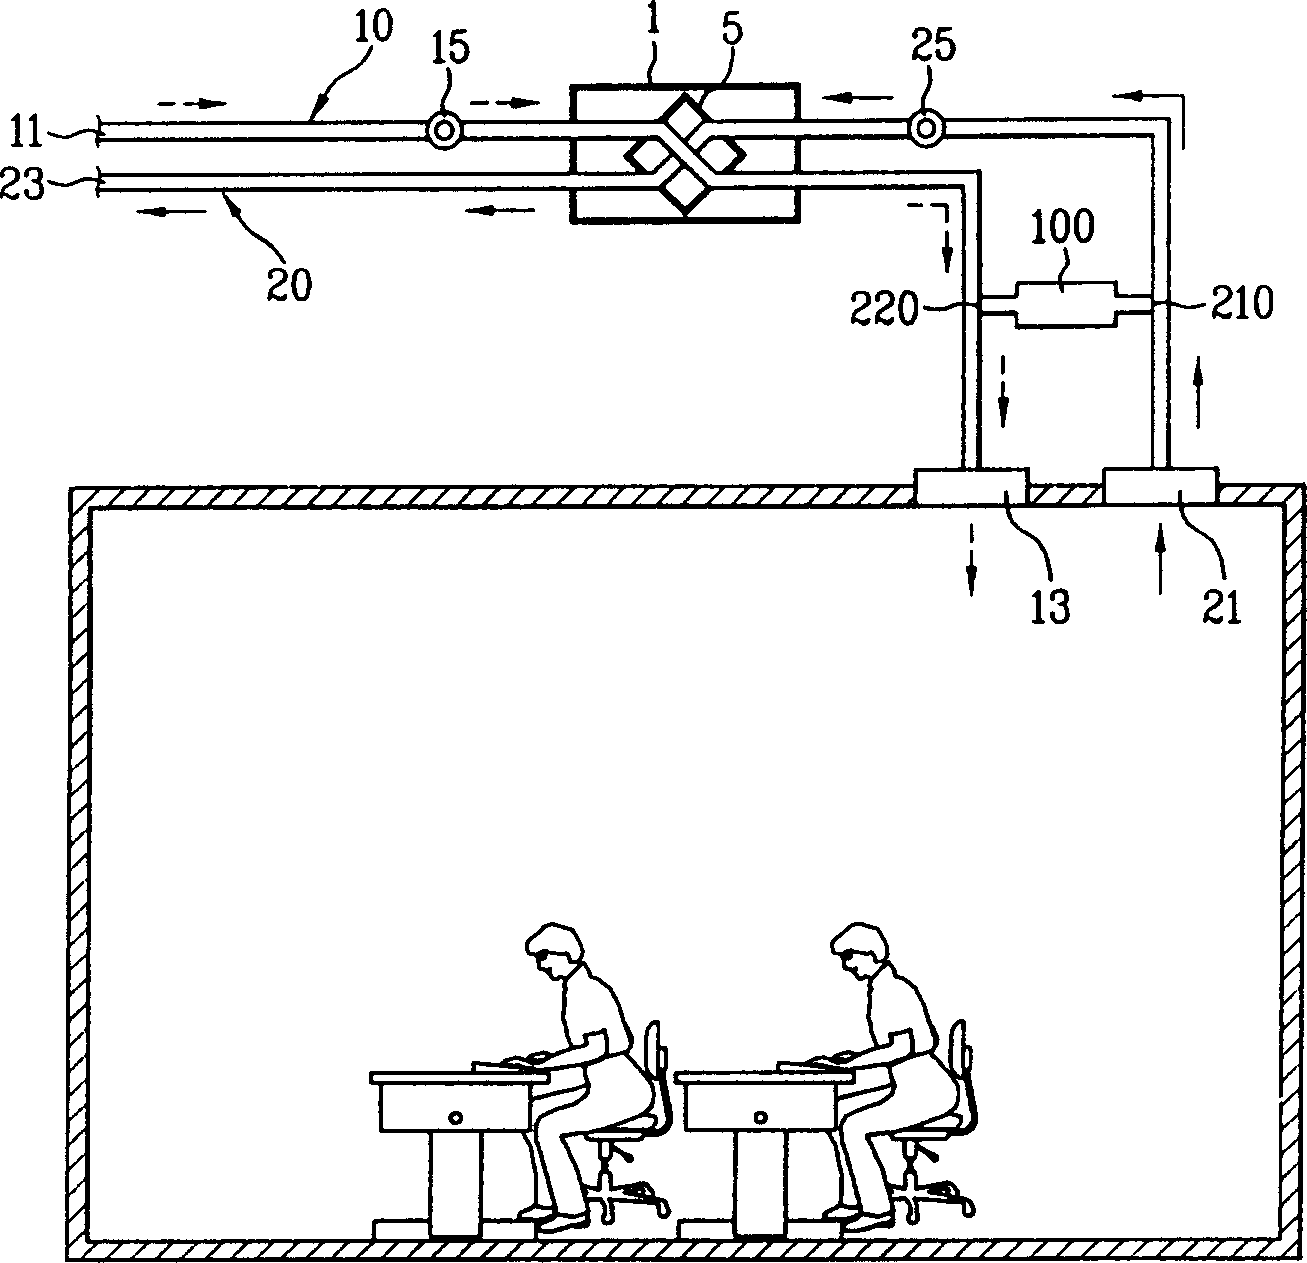 Ventilation system integrated with air cleaning equipment